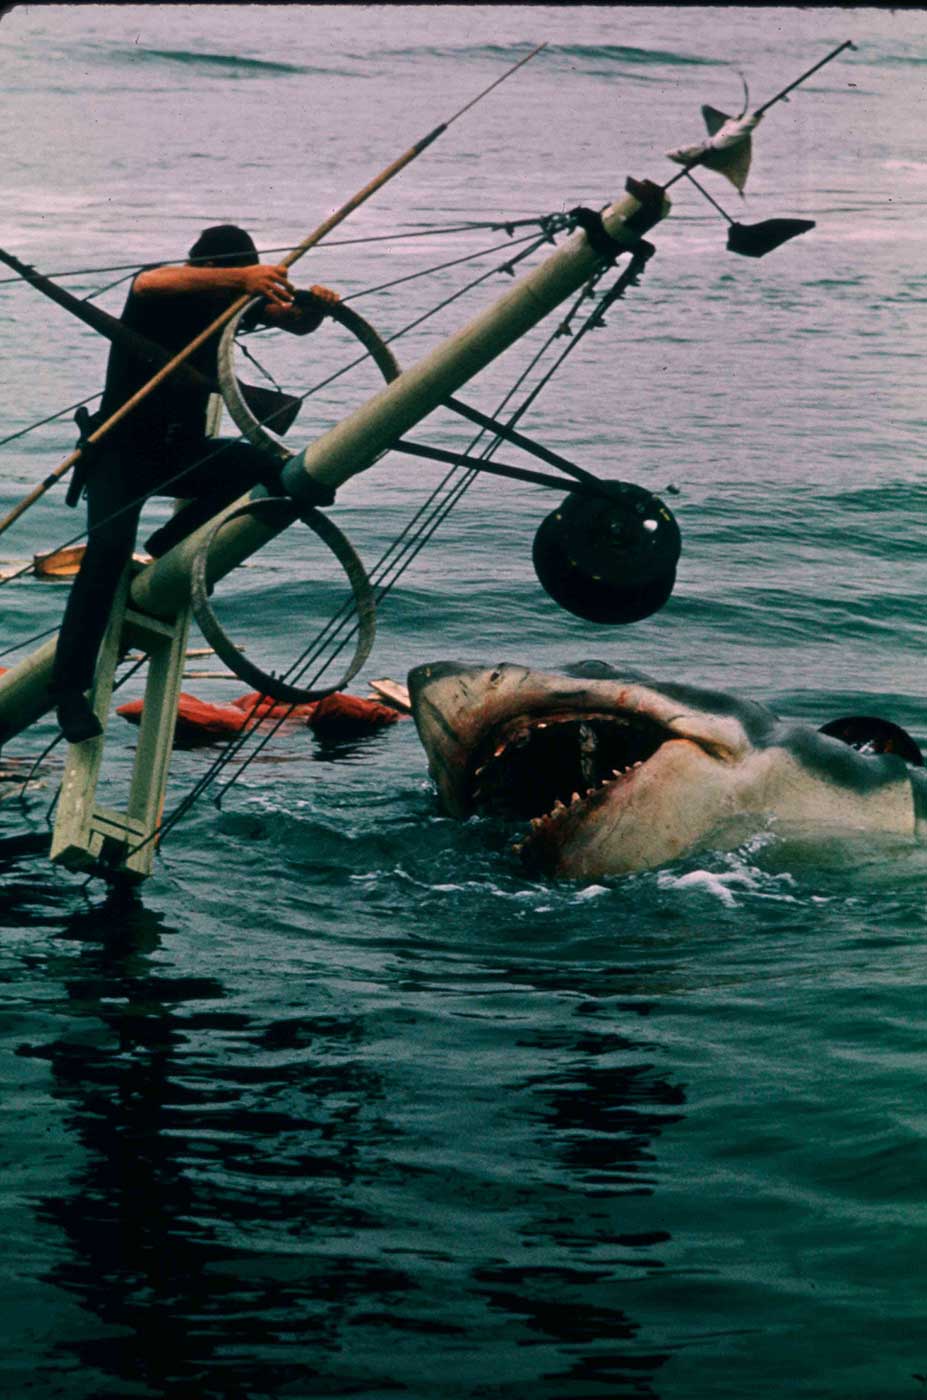 Jaws | Oscars.org | Academy of Motion Picture Arts and Sciences